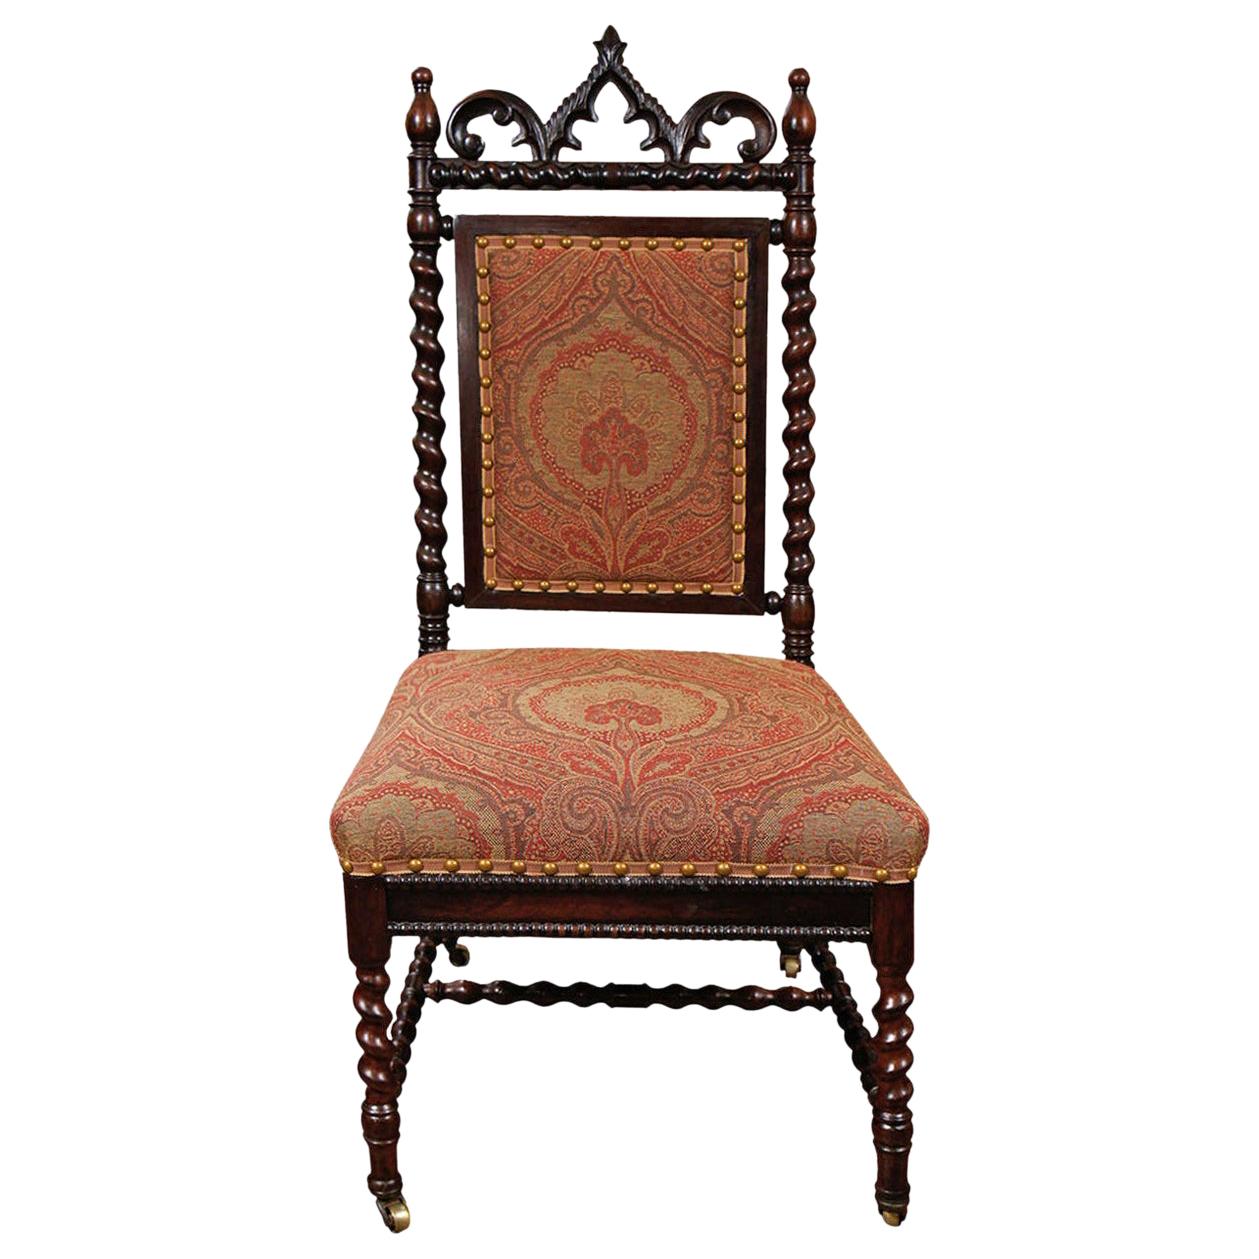 Gothic Revival Walnut Side Chair on Casters with Paisley Upholstery For Sale